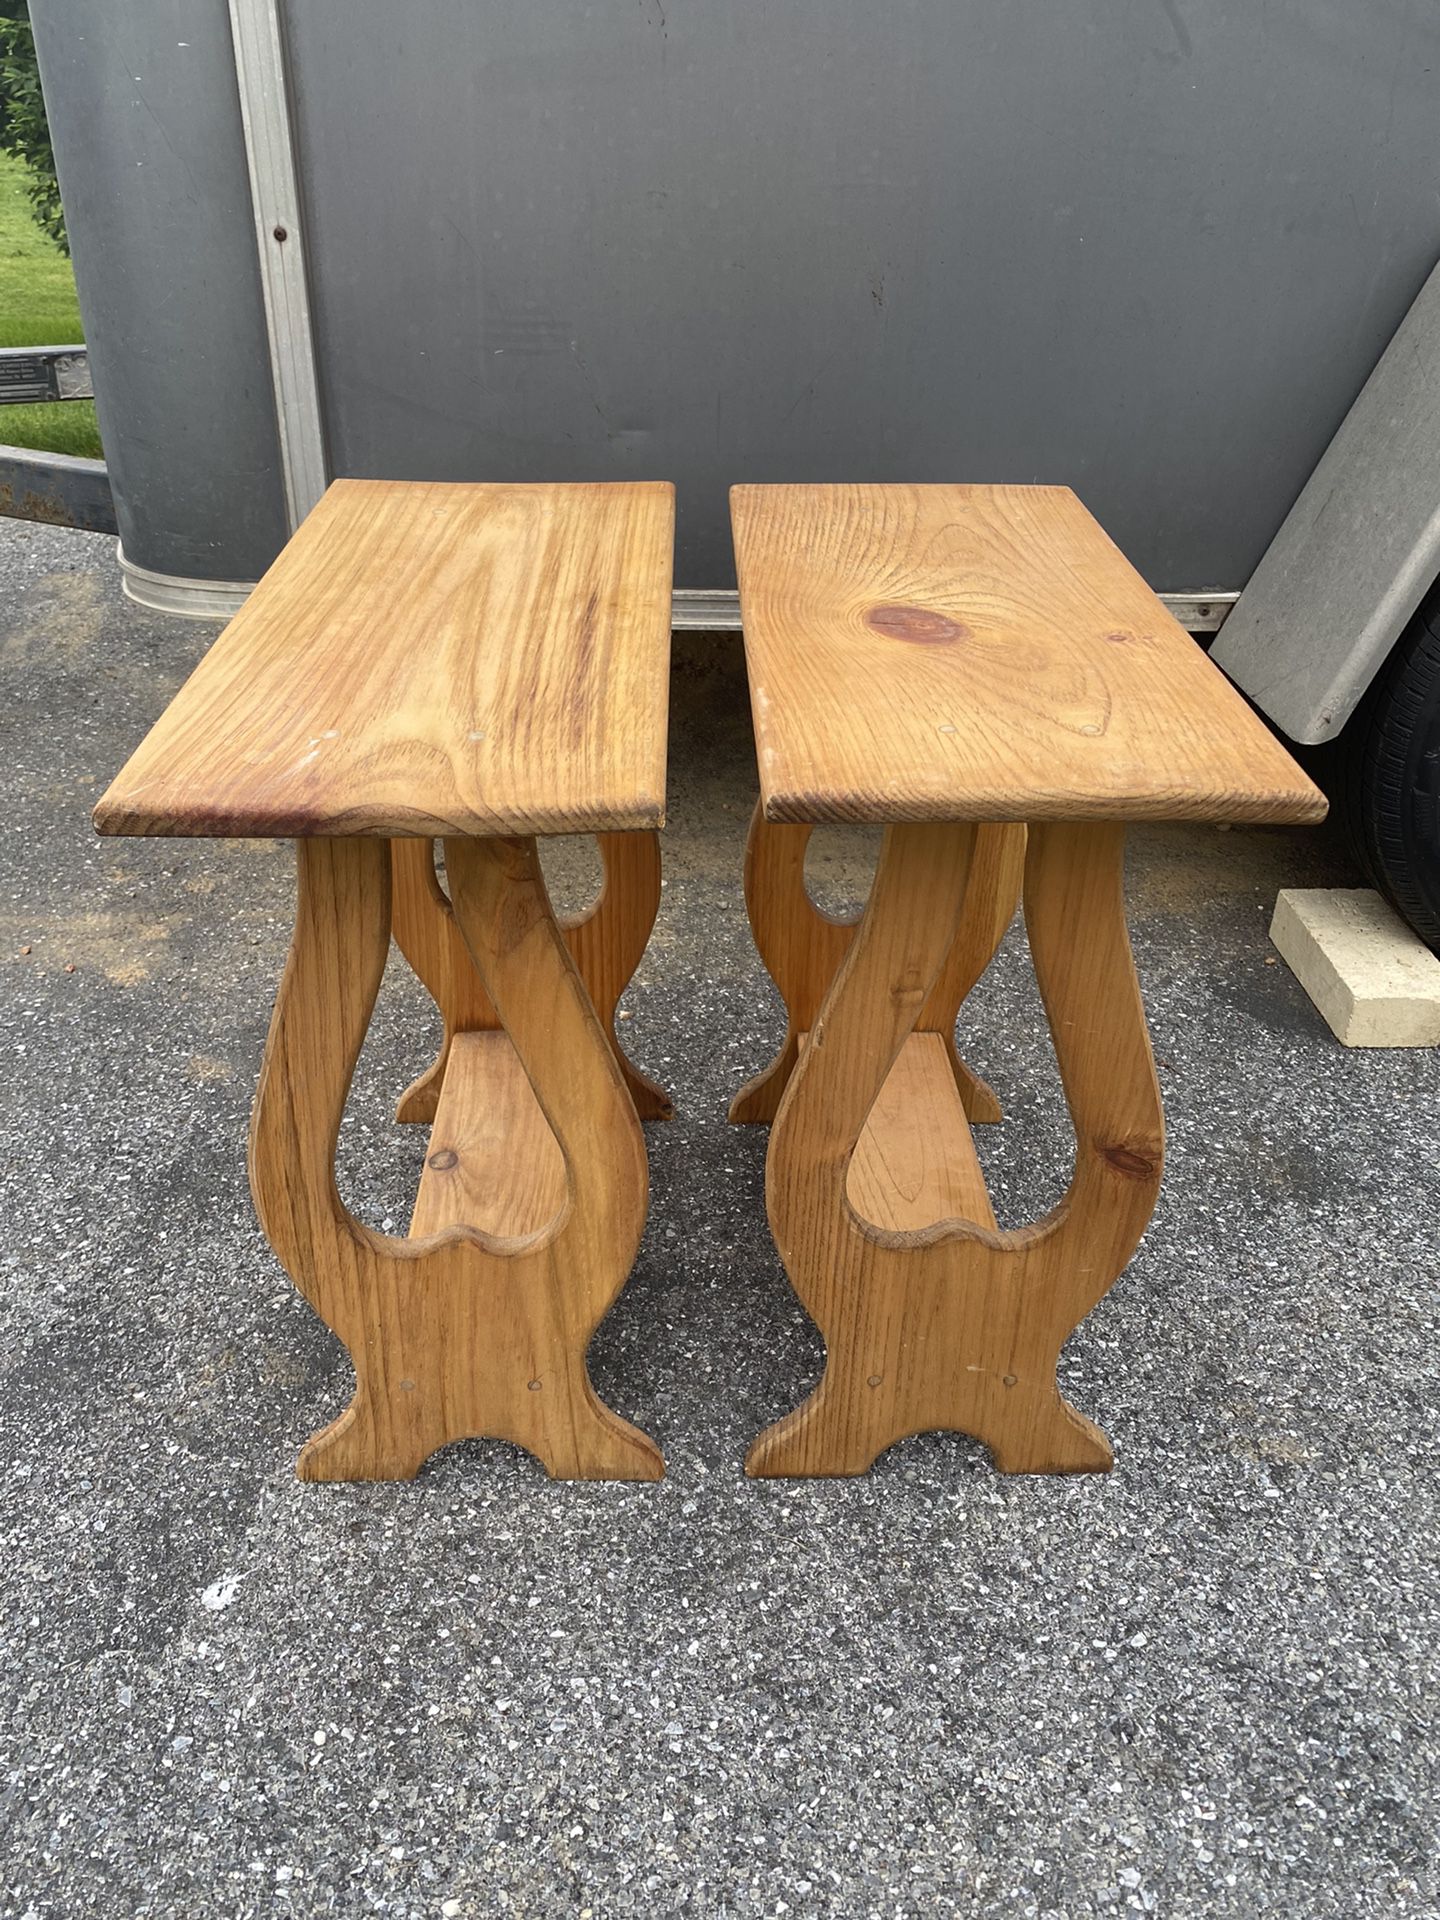 Solid Wood End / Side Tables -Good Cond. - Marietta, Pa Pick Up . 